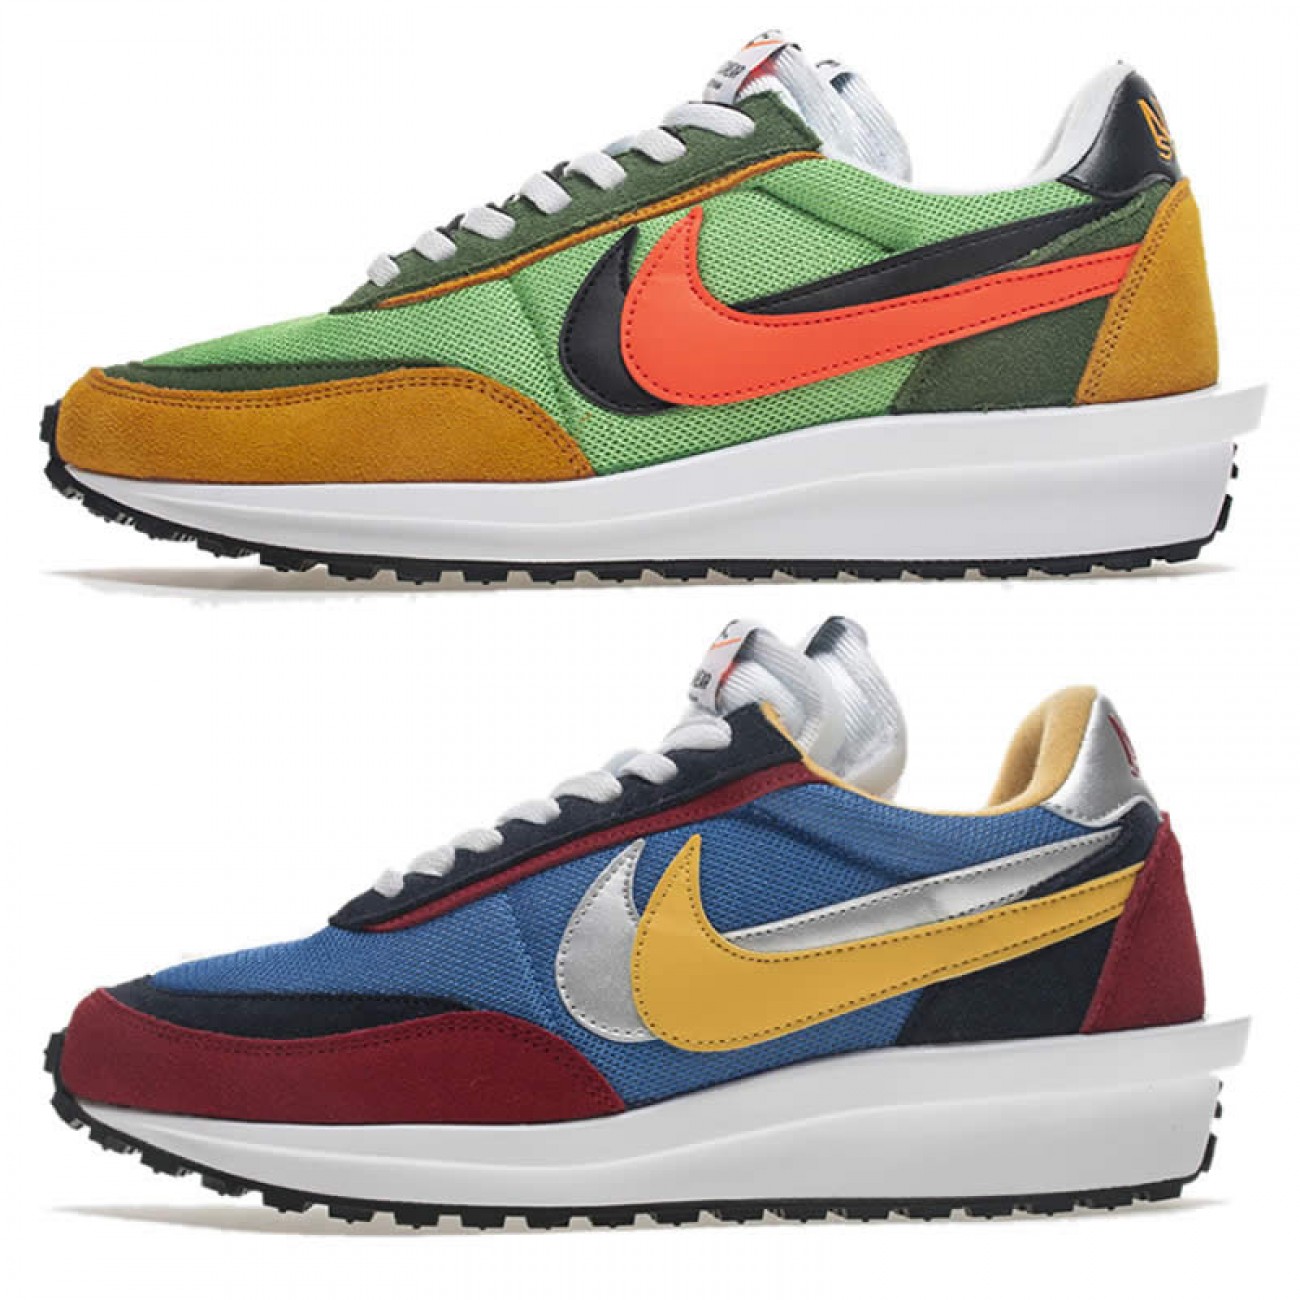 nike red green yellow shoes